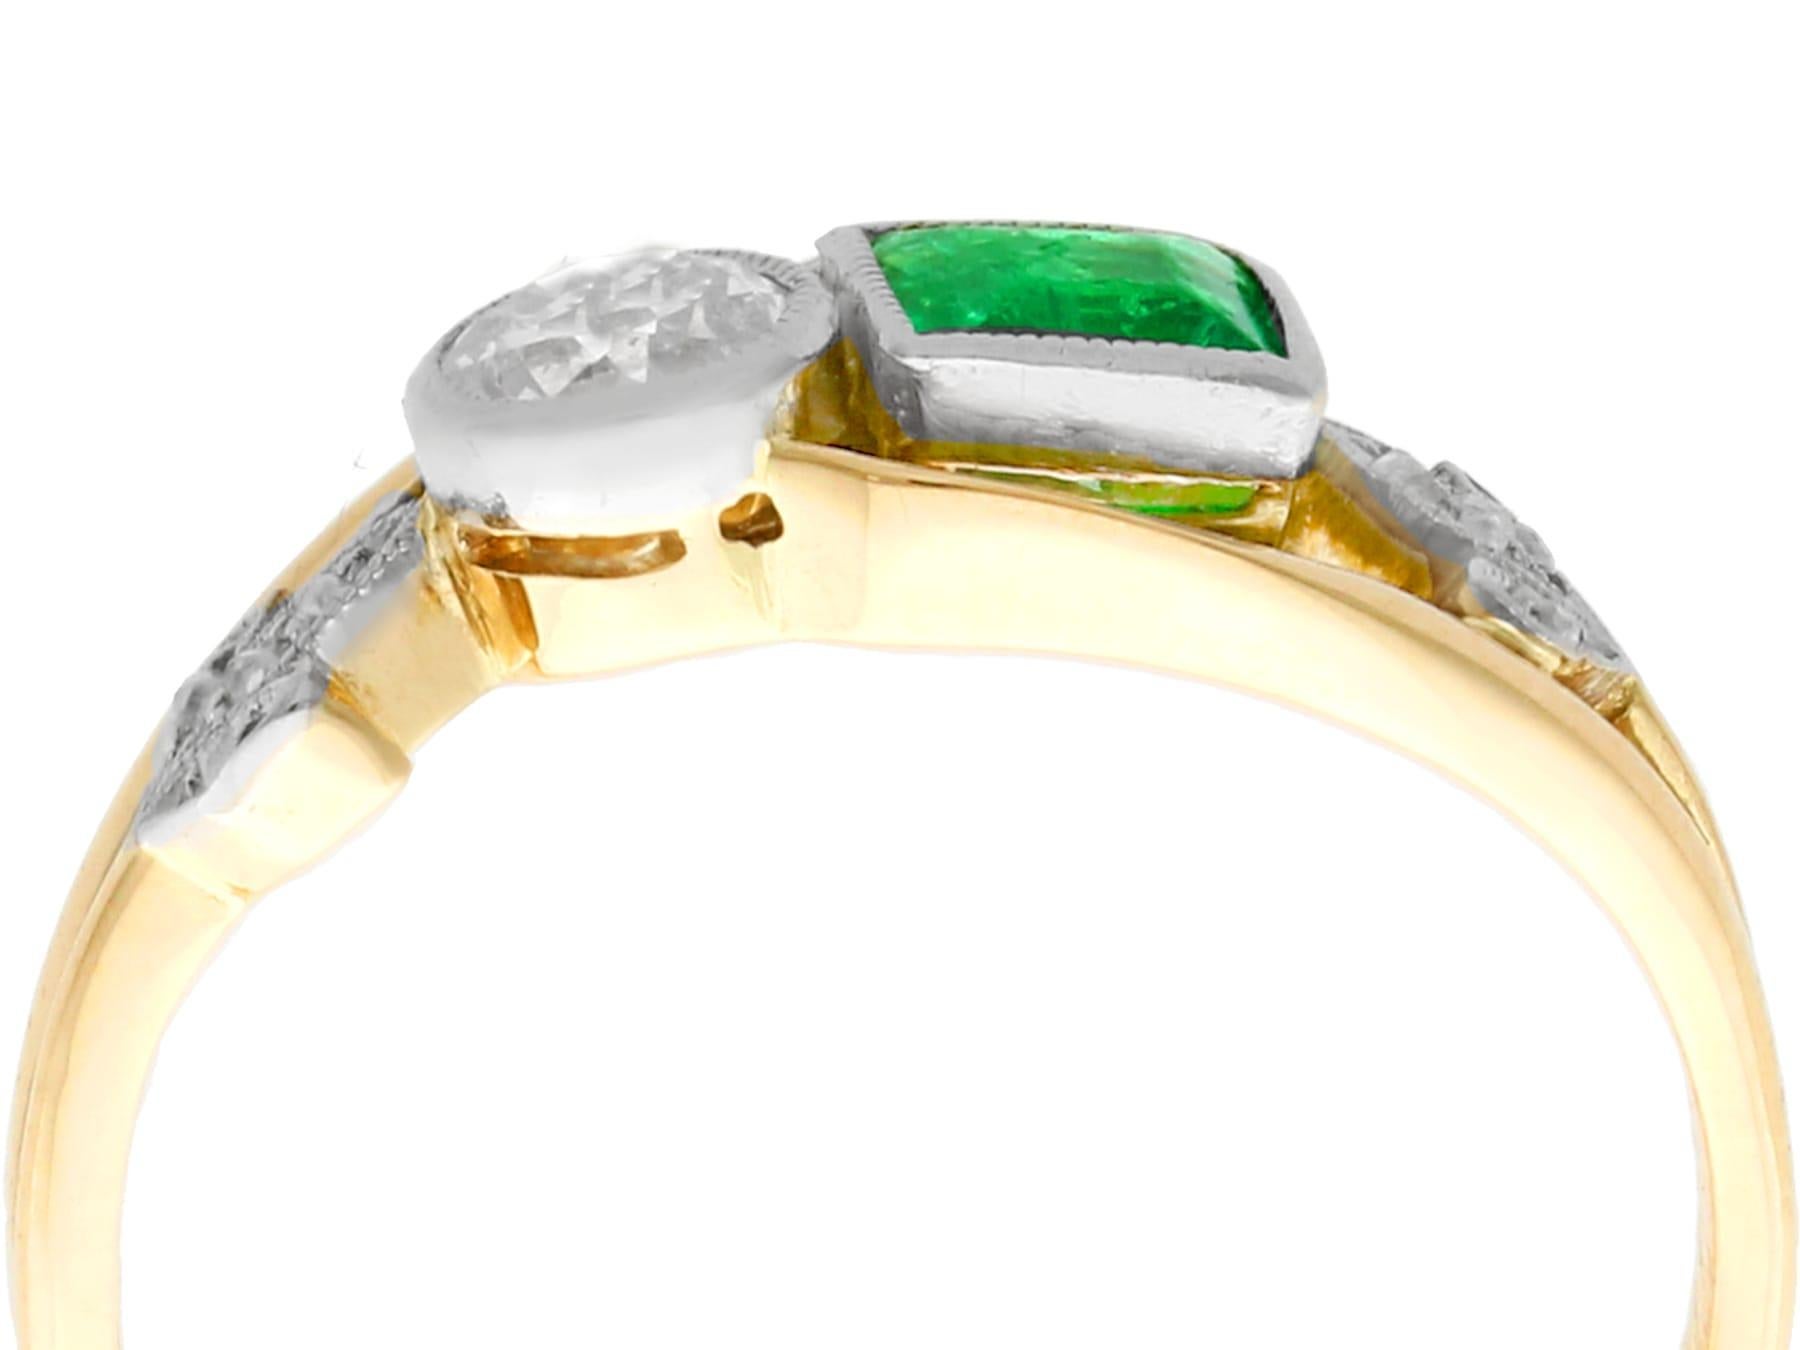 A fine and impressive antique 0.30 carat emerald and 0.22 carat diamond, 14 karat yellow gold and platinum set twist ring; part of our diverse antique jewelry collections.

This fine and impressive antique emerald ring has been crafted in 14k yellow